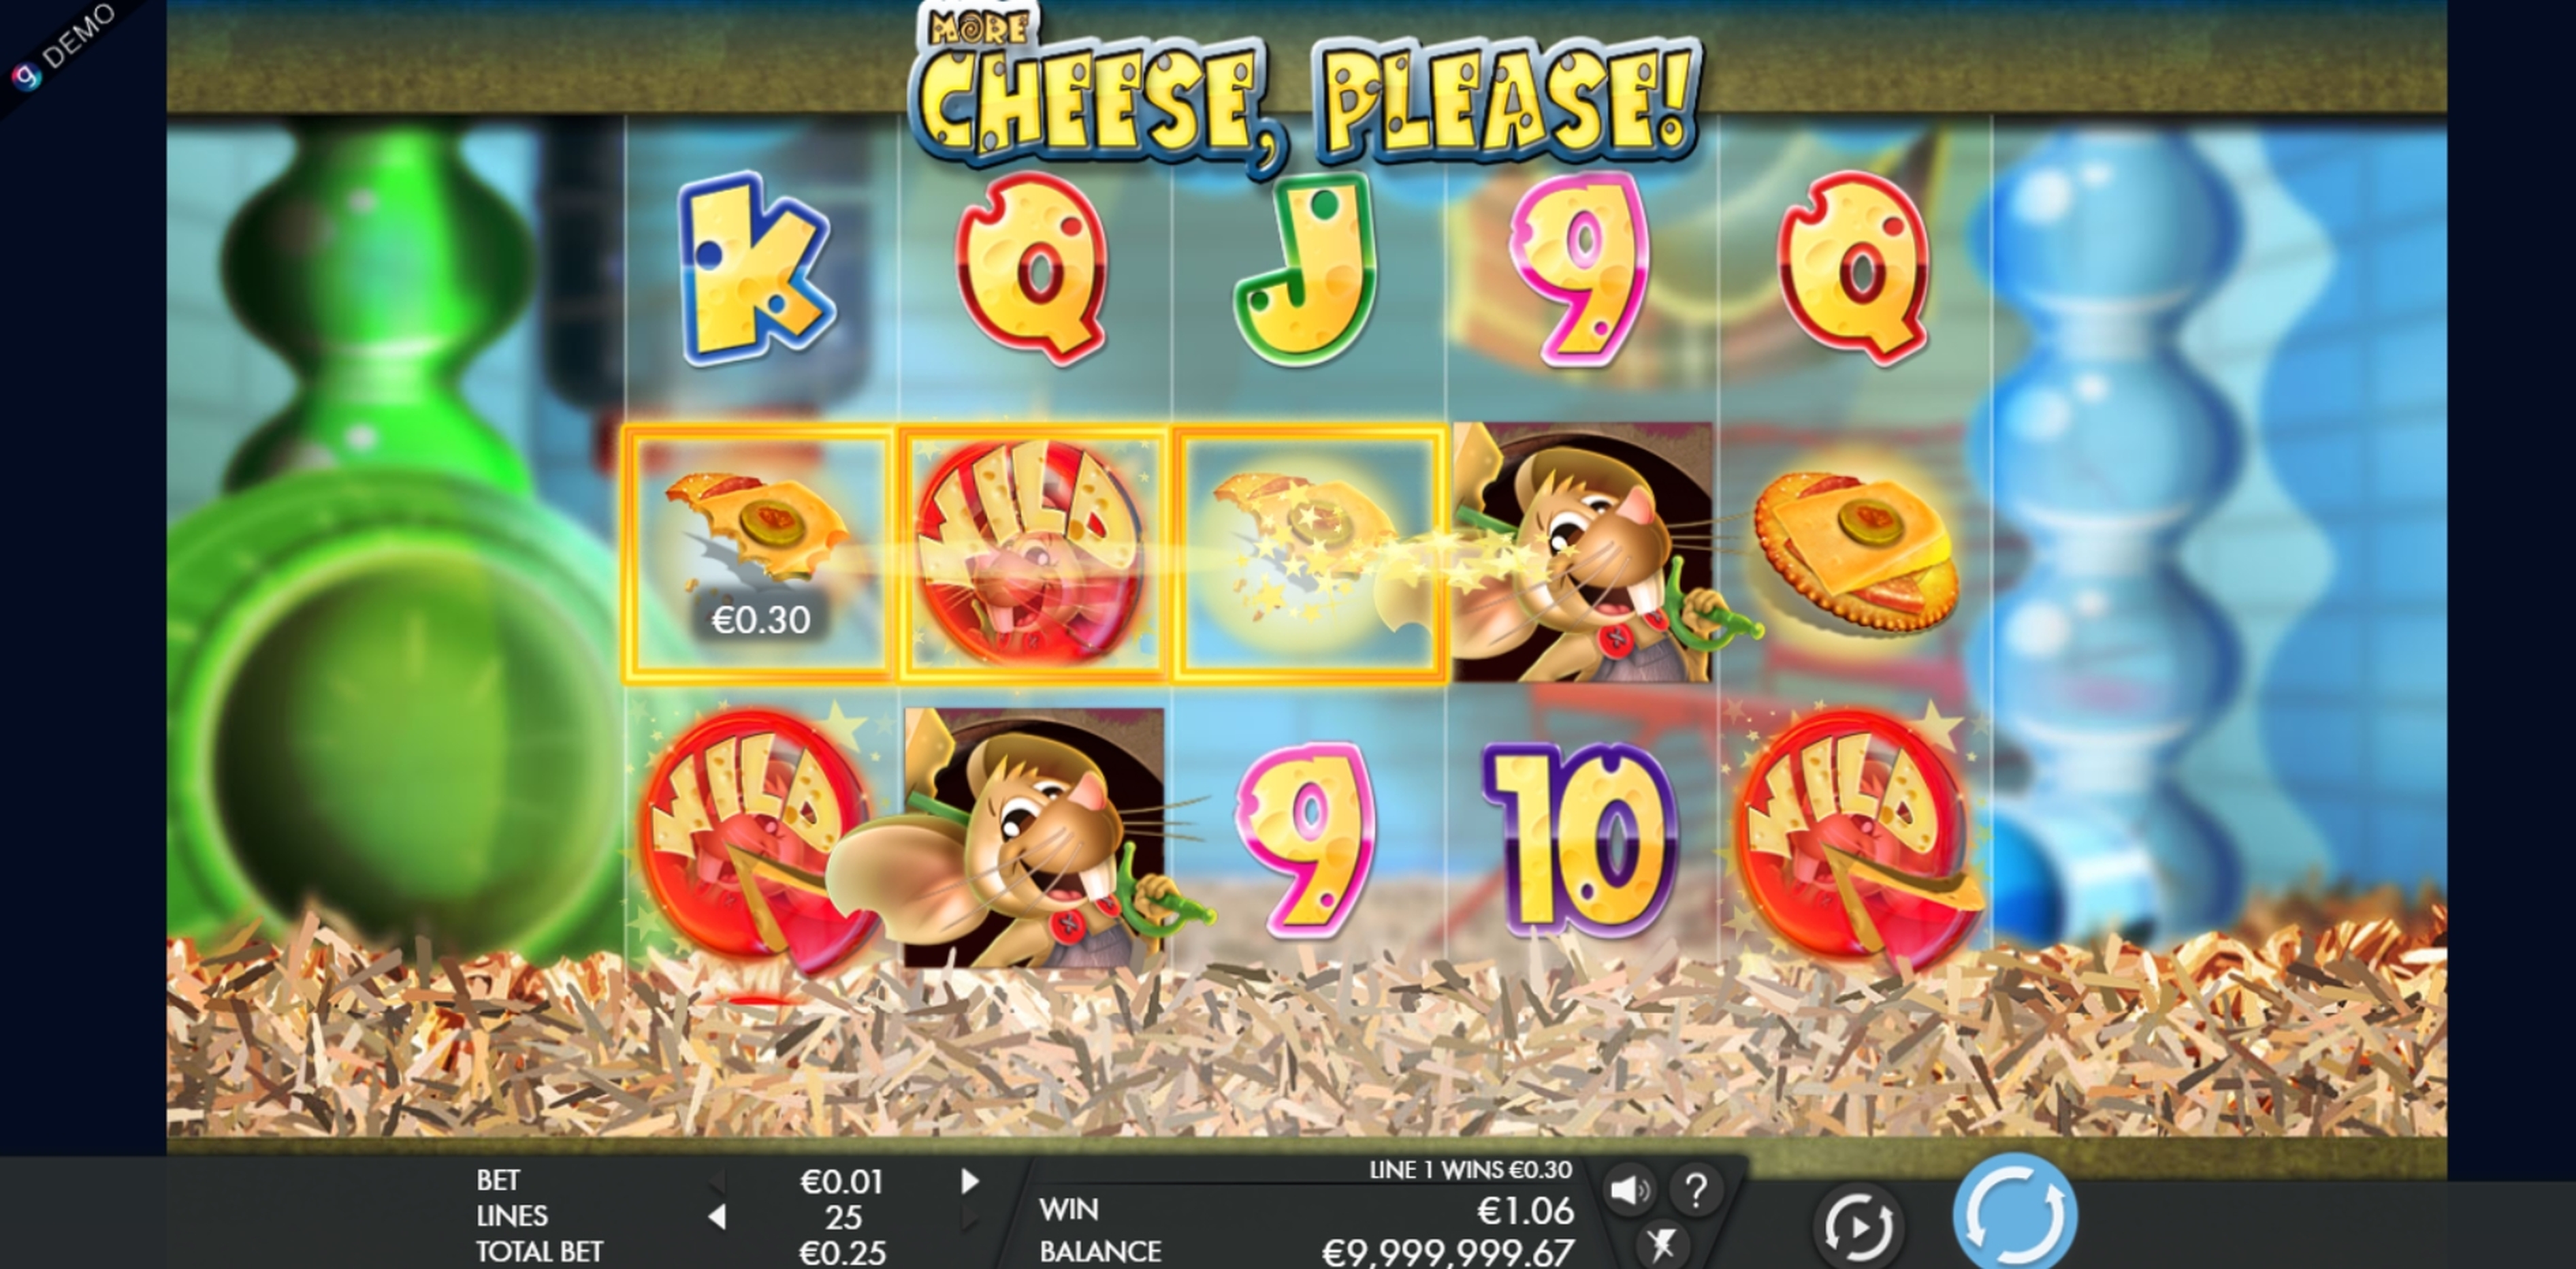 Win Money in More Cheese Please Free Slot Game by Genesis Gaming